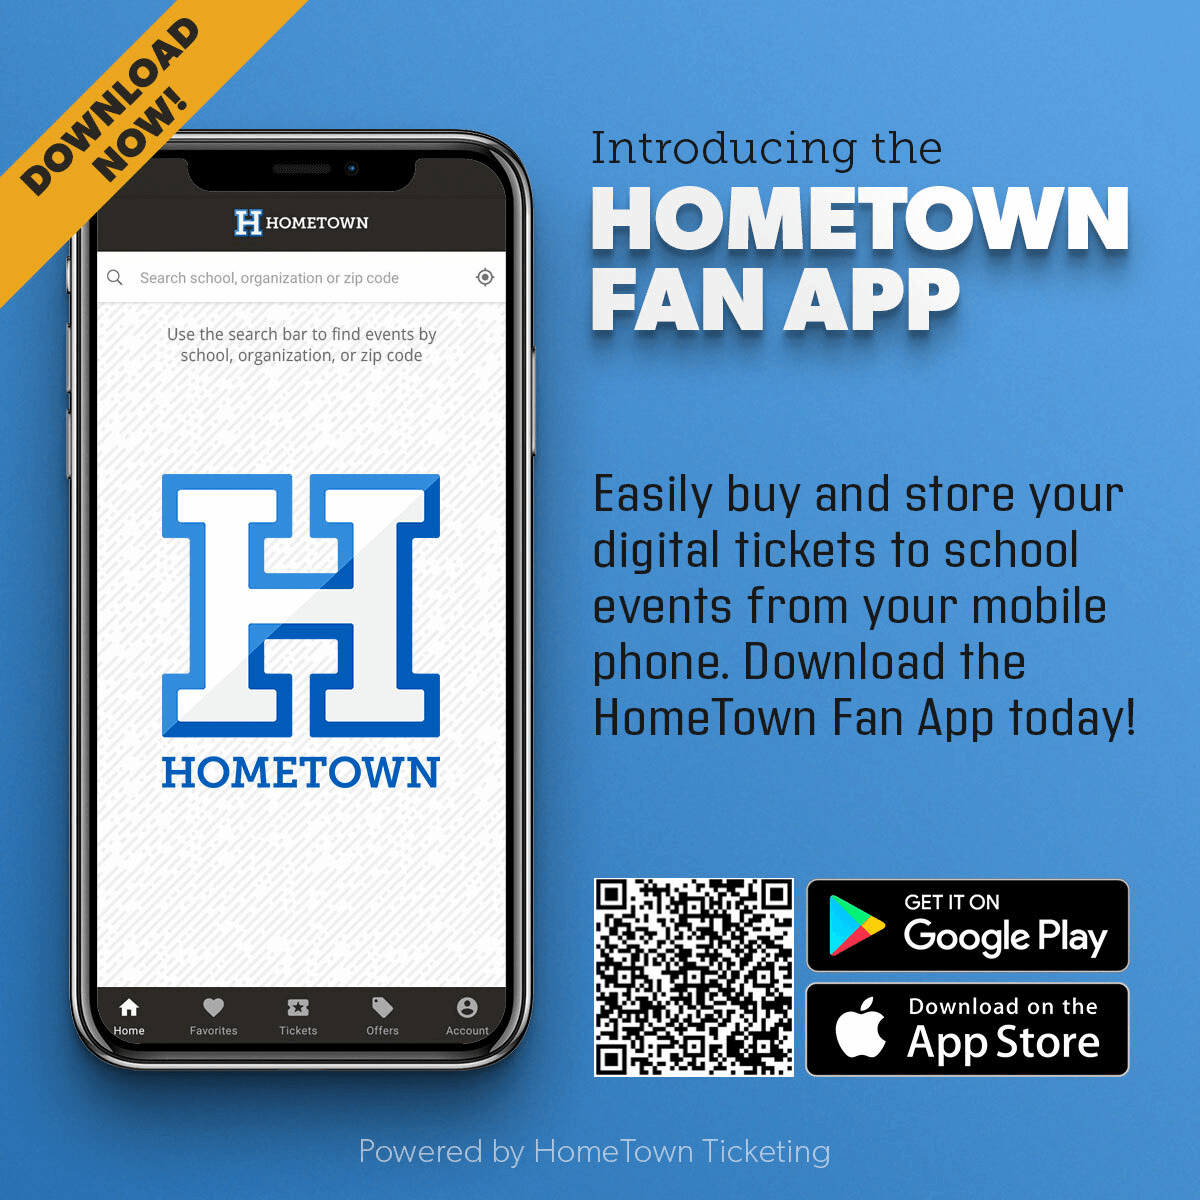 Download the app and buy your tickets much faster!